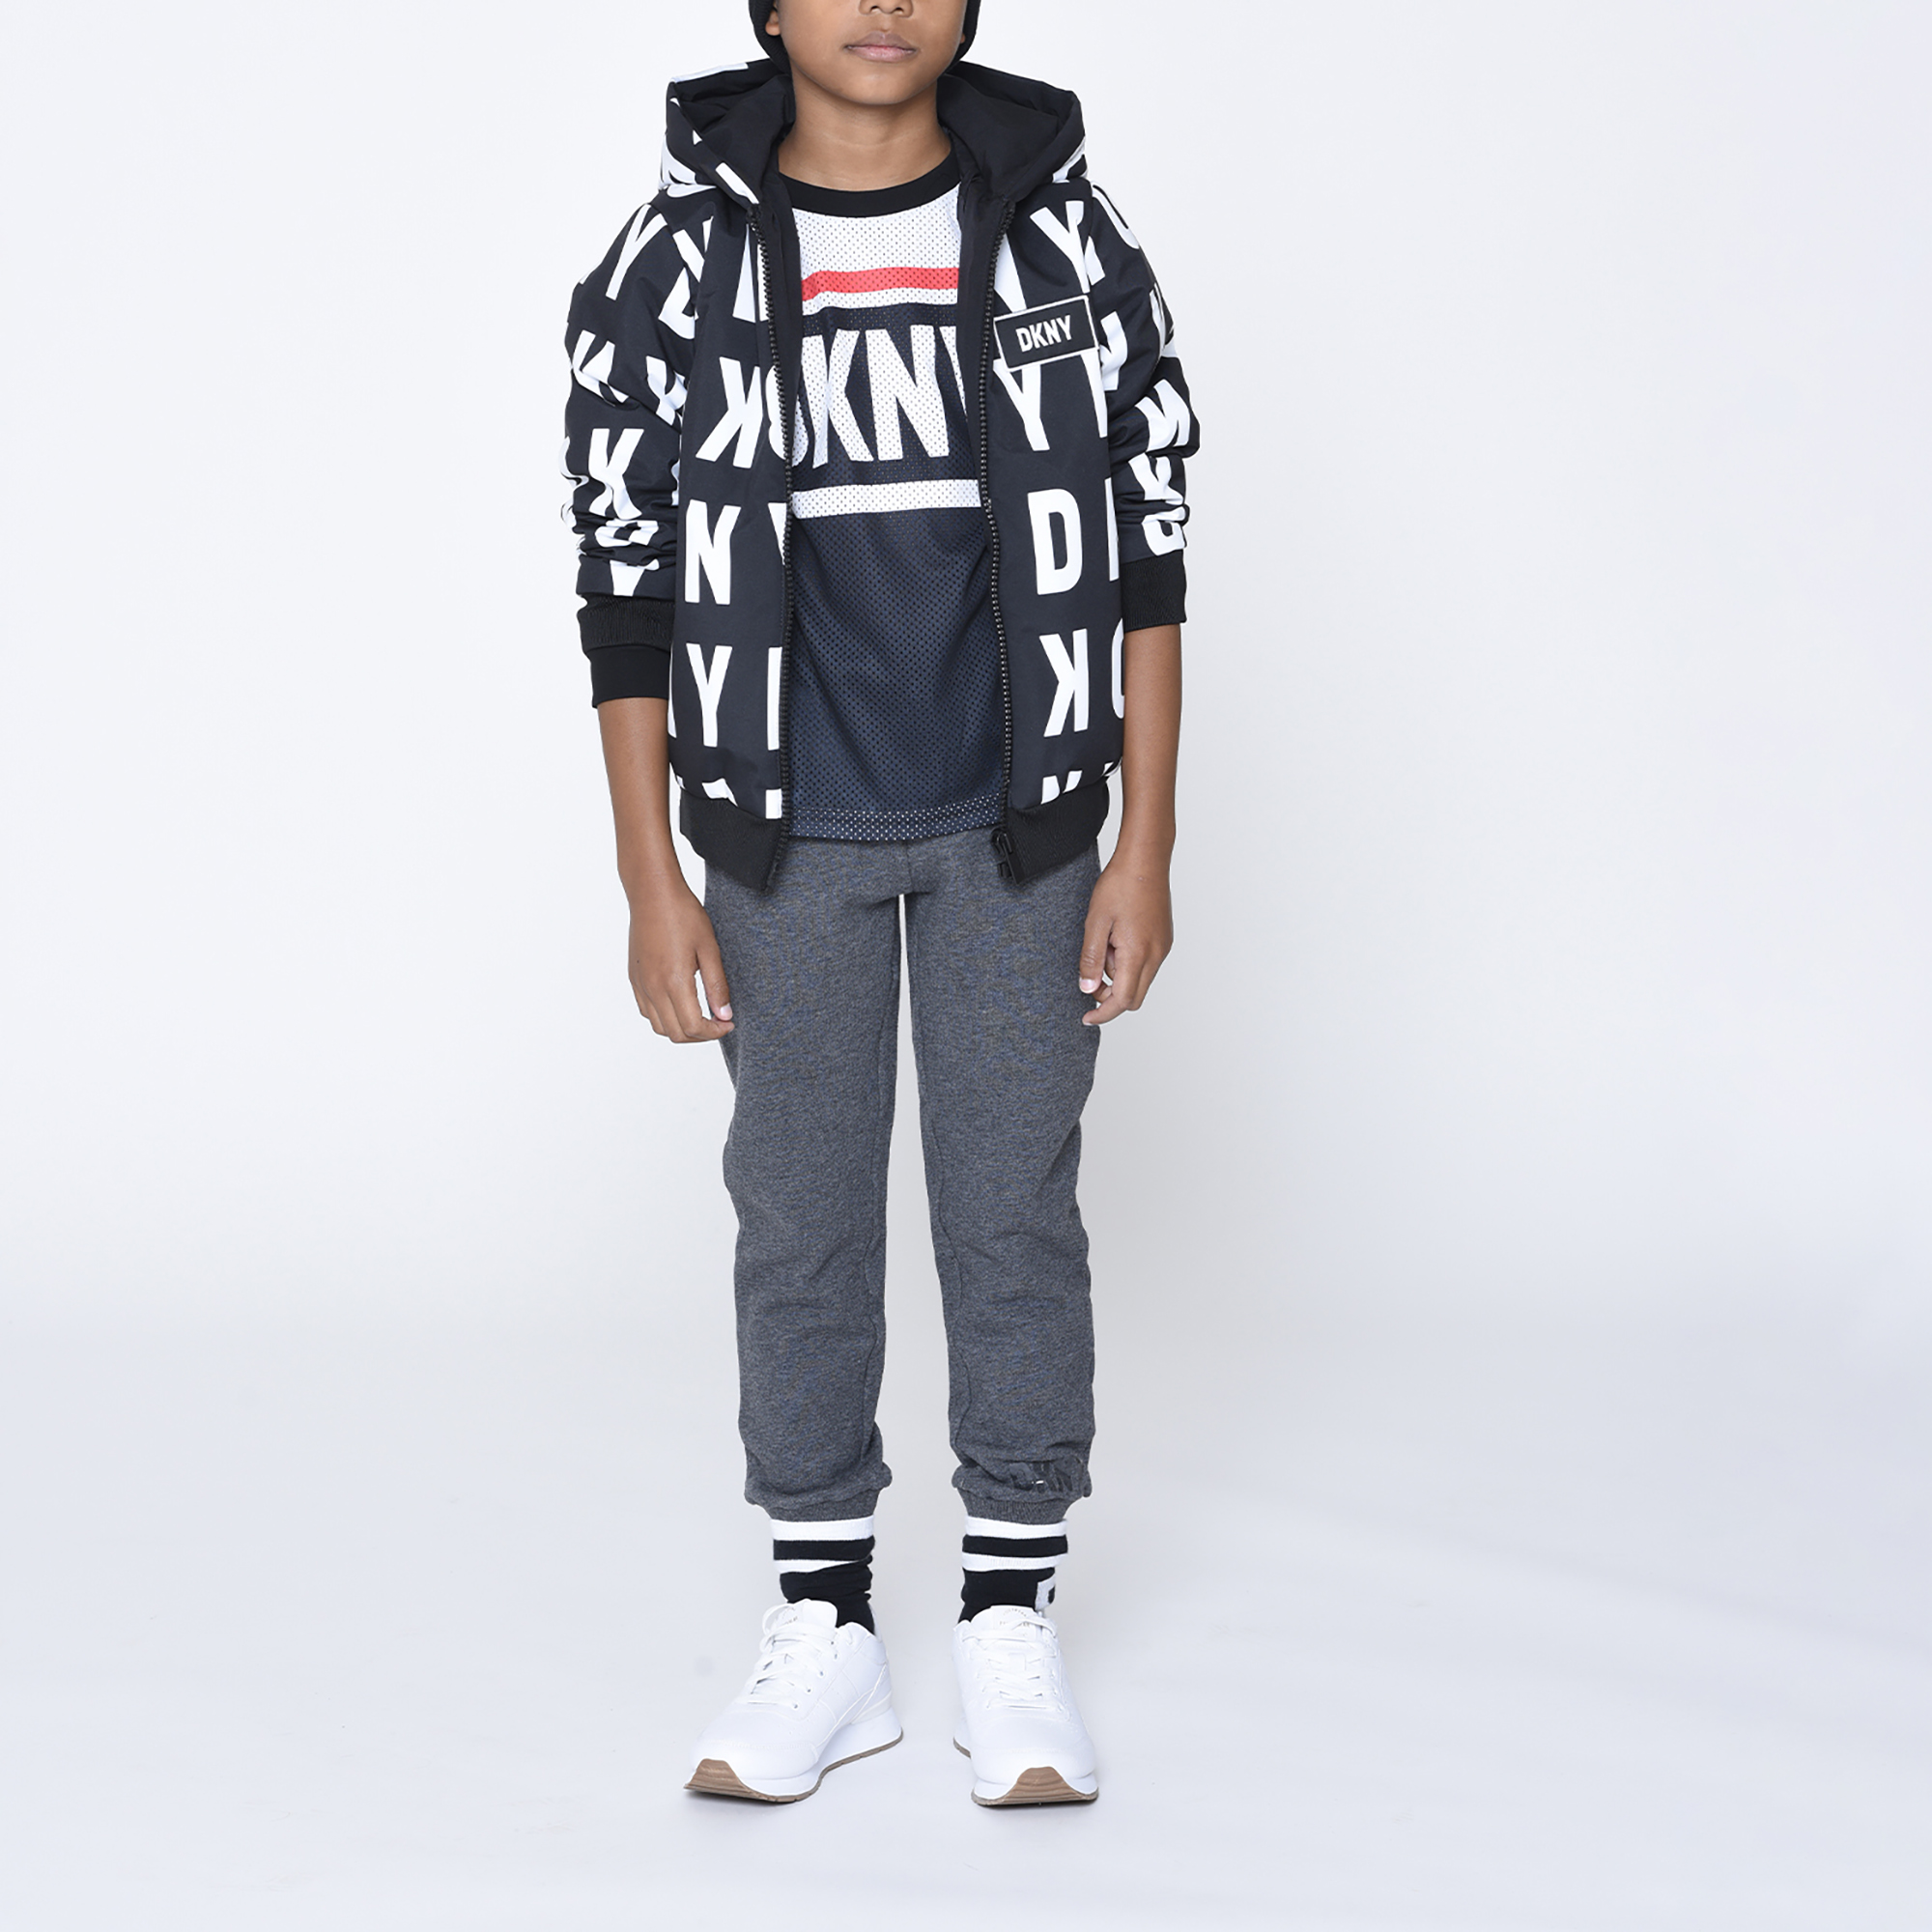 T-shirt with printed stripes DKNY for BOY